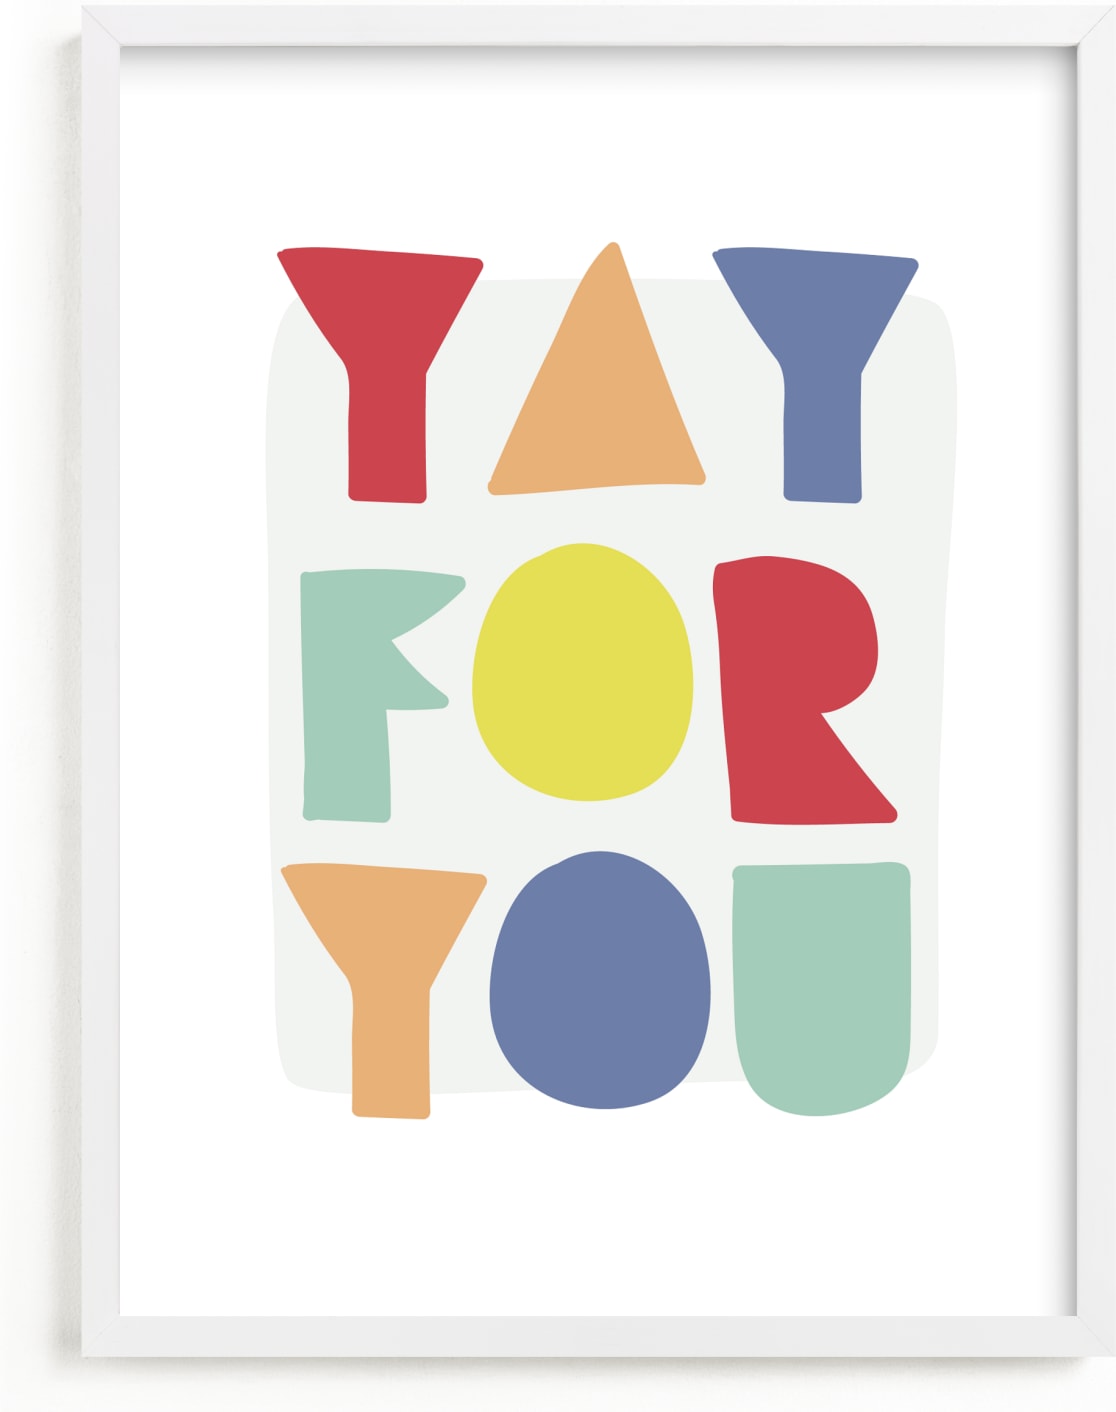 This is a colorful kids wall art by Lea Delaveris called Yay for you.